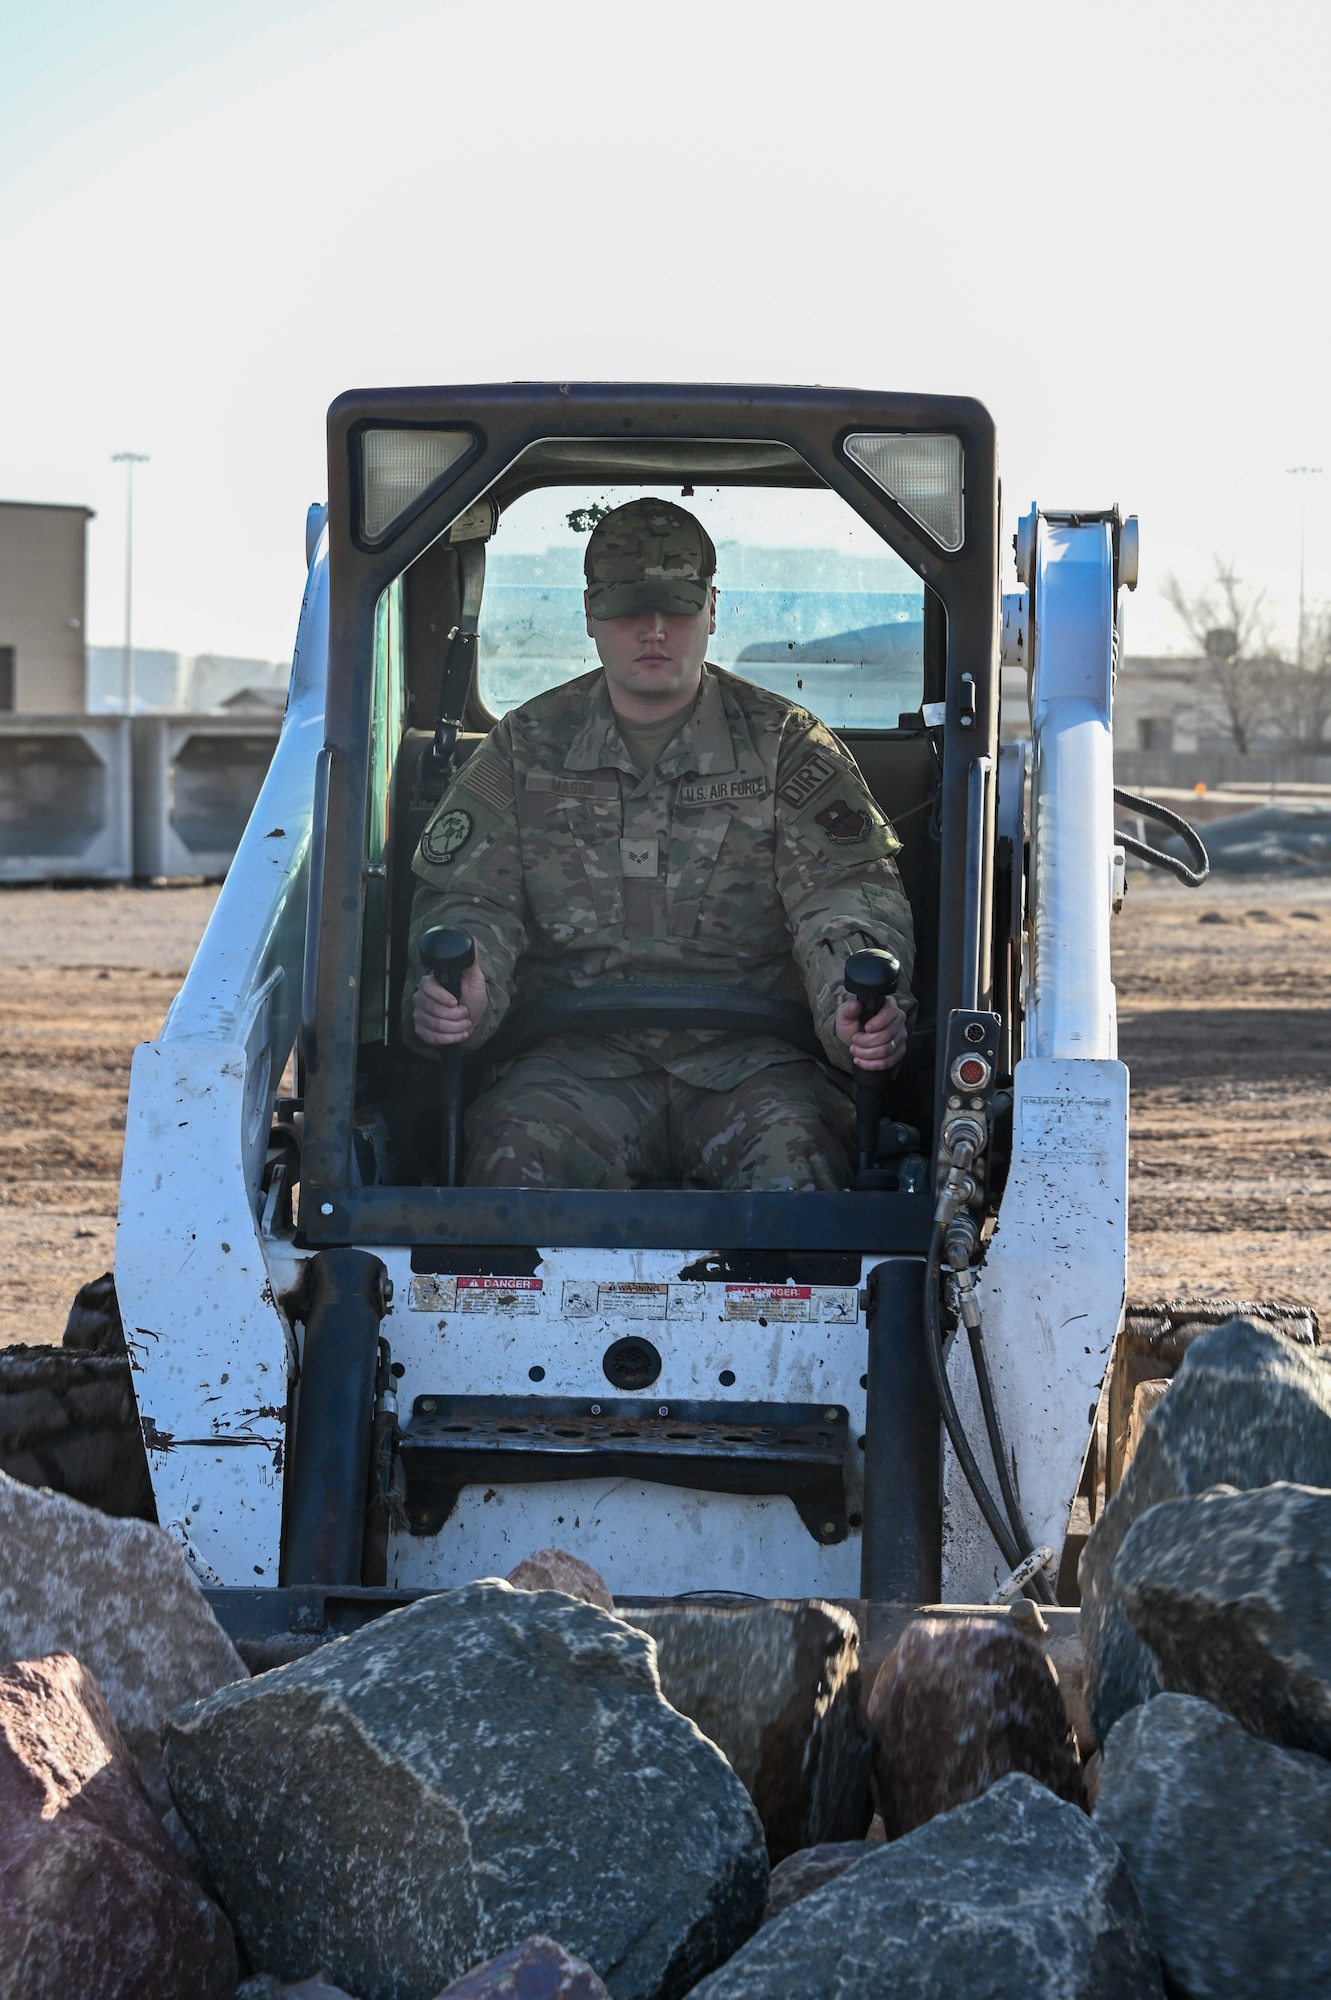 U.S. Air Force Senior Airman John Mason, 97th Civil Engineer Squadron pavement and equipment operator journeyman, operates heavy machinery at Altus Air Force Base, Oklahoma, Feb. 15, 2023. Dirt boyz are a team of Airmen who take care of the base from building flood gates to paving new roads. (U.S. Air Force photo by Senior Airman Kayla Christenson)